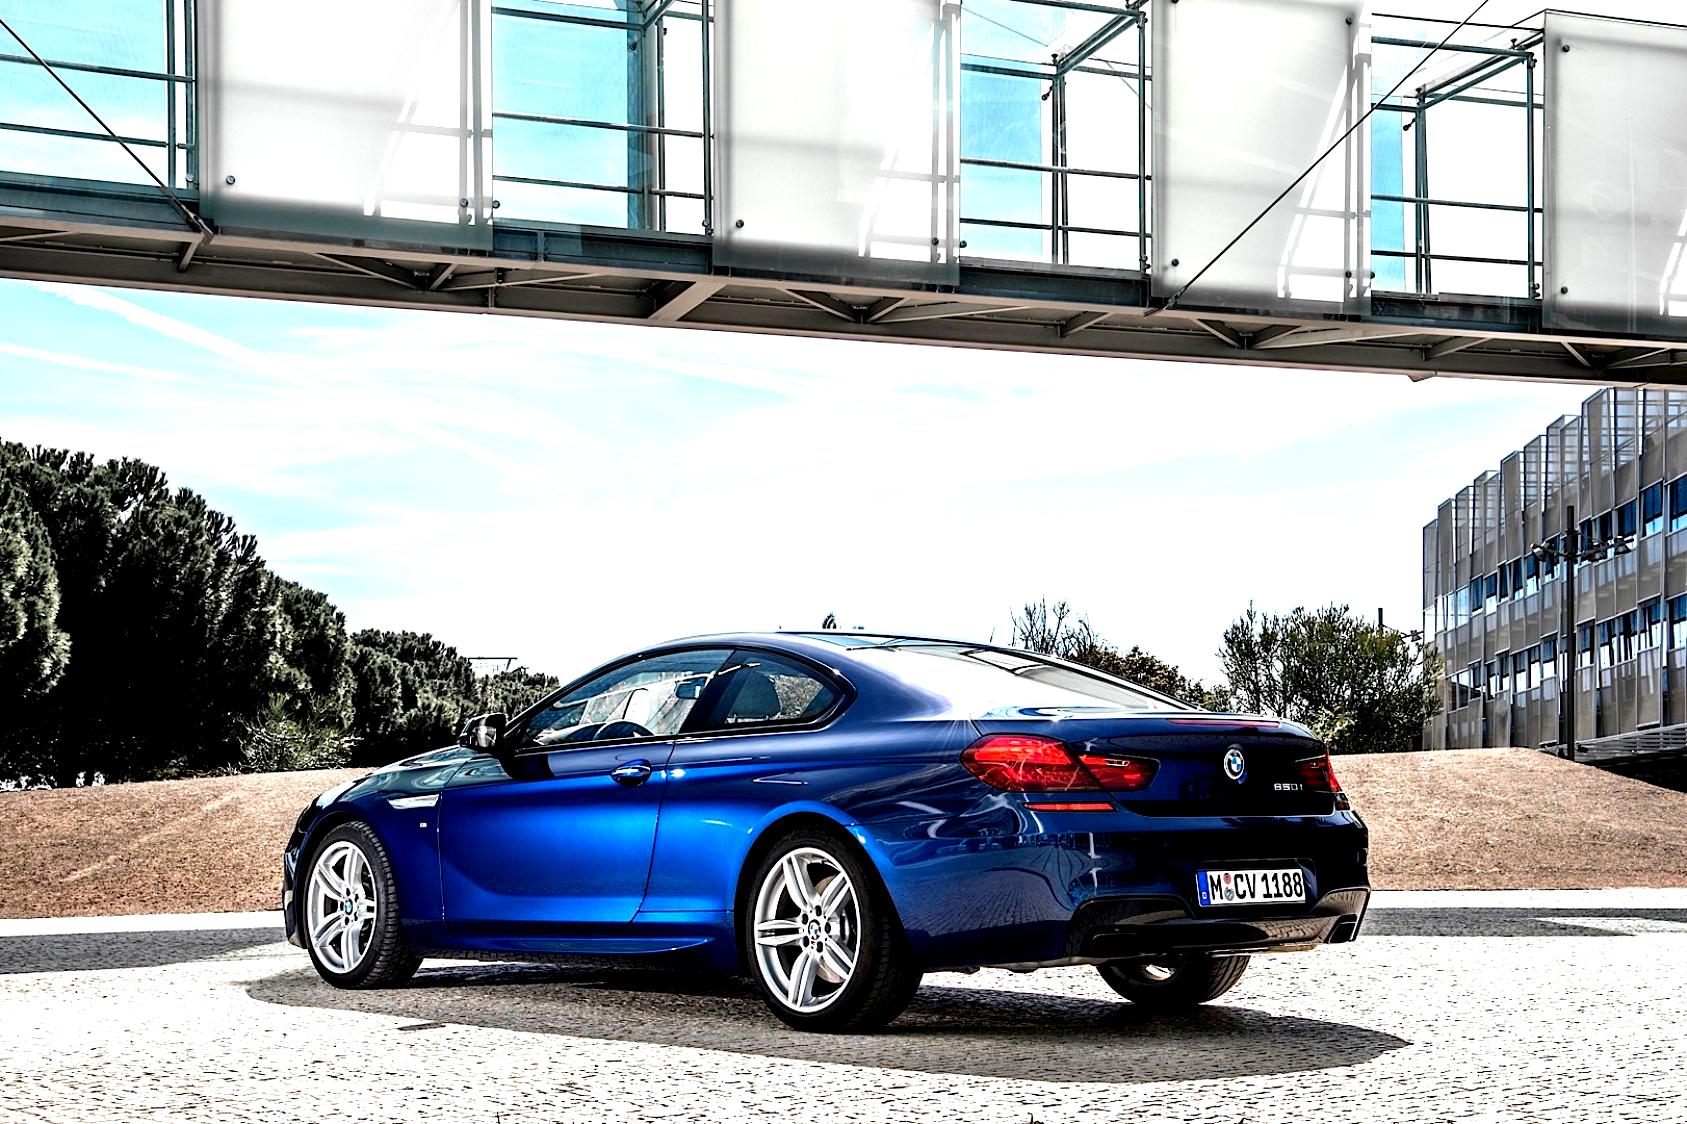 BMW 6 Series Coupe F13 2011 #59